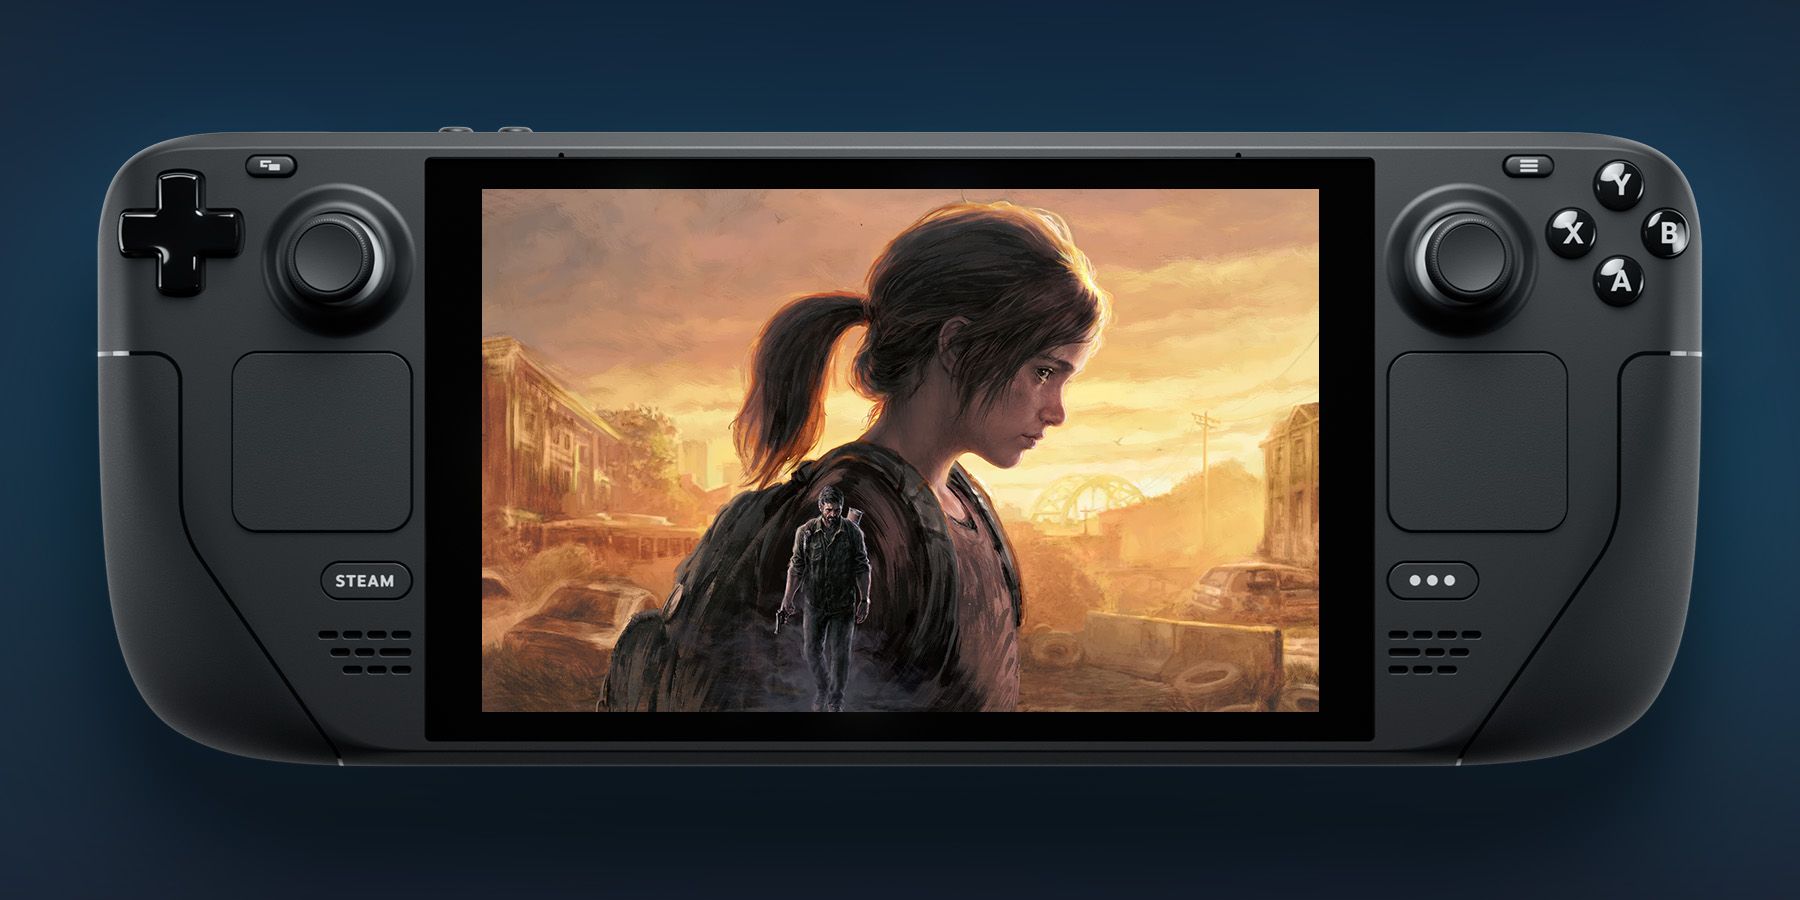 The Last of Us Part 1 (update 1.1.2) on Steam Deck/OS in 800p 30+